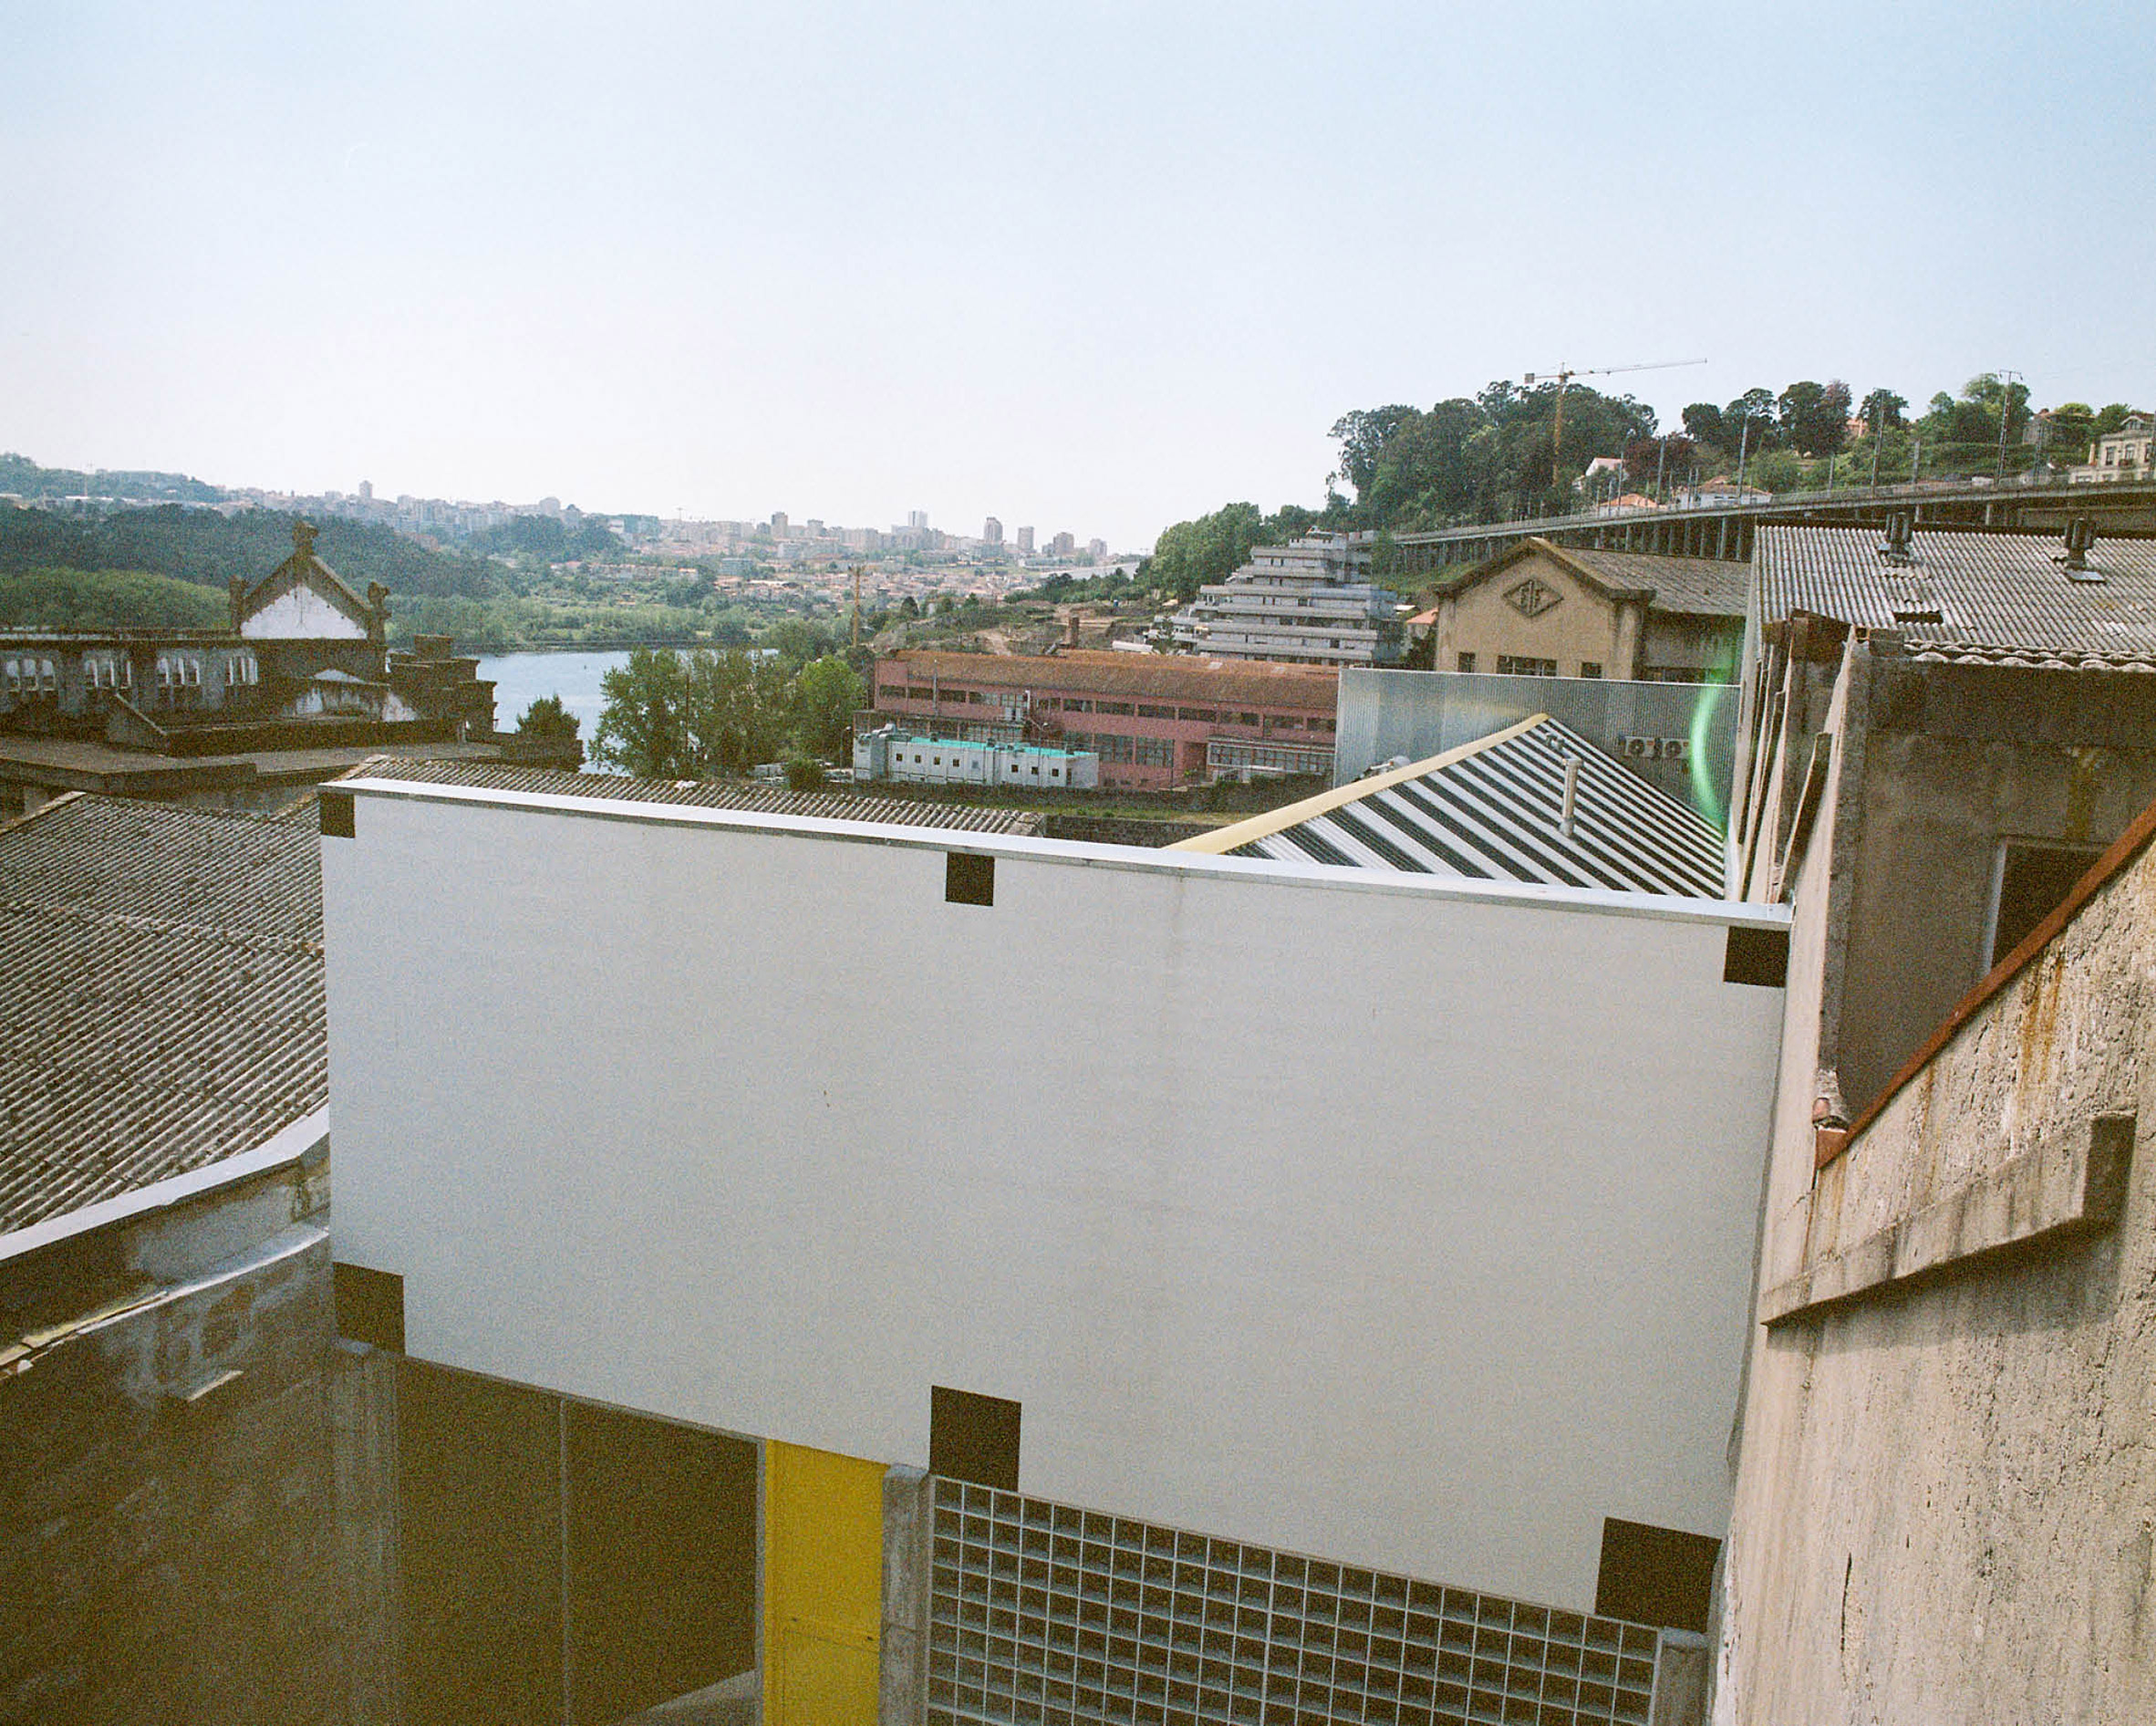 Gable roof and facade of the House of many faces by Fala Atelier in Porto